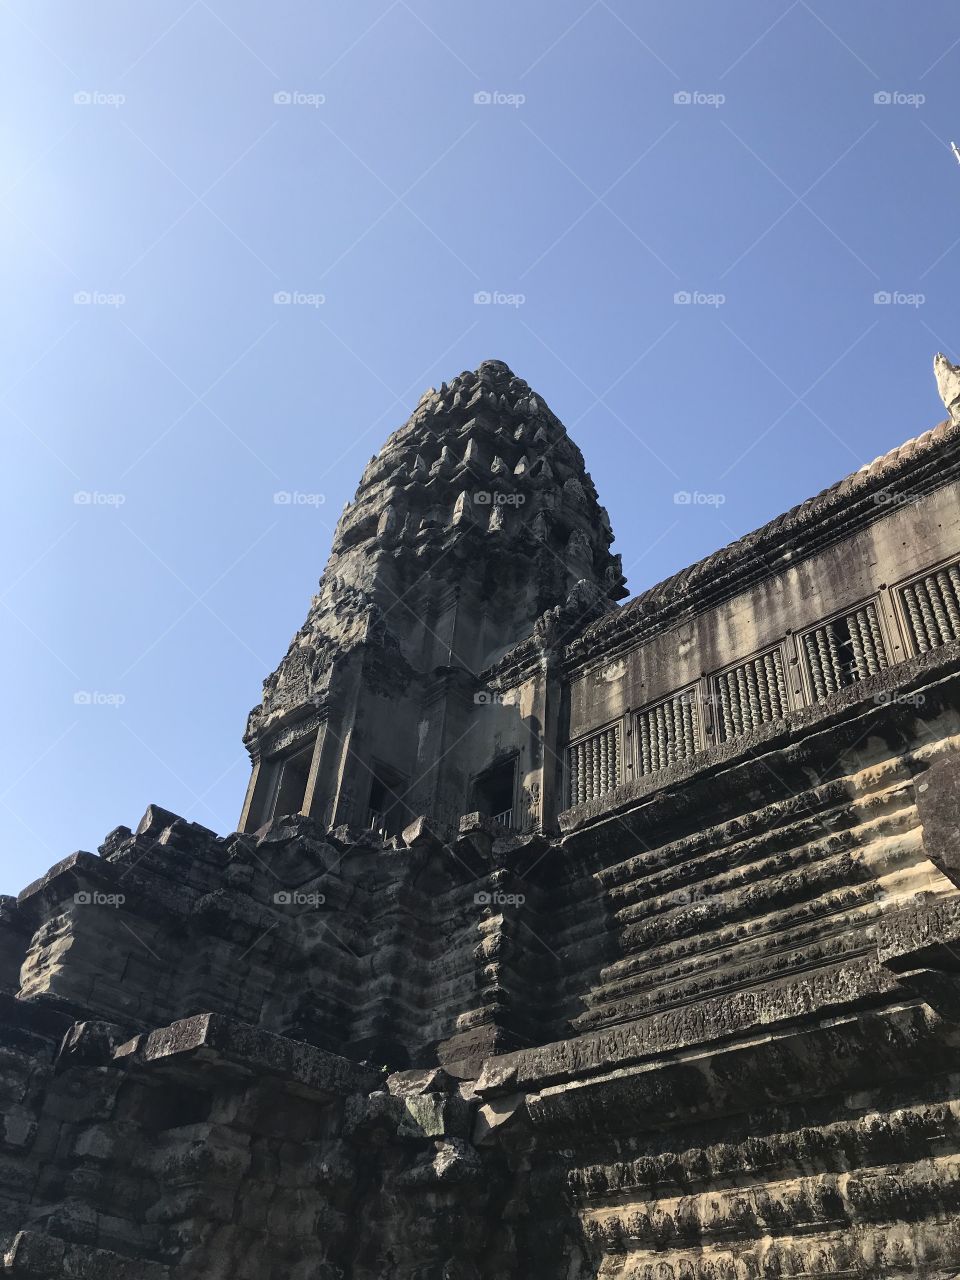 Ancient temple in Angkor Wat, Cambodia 